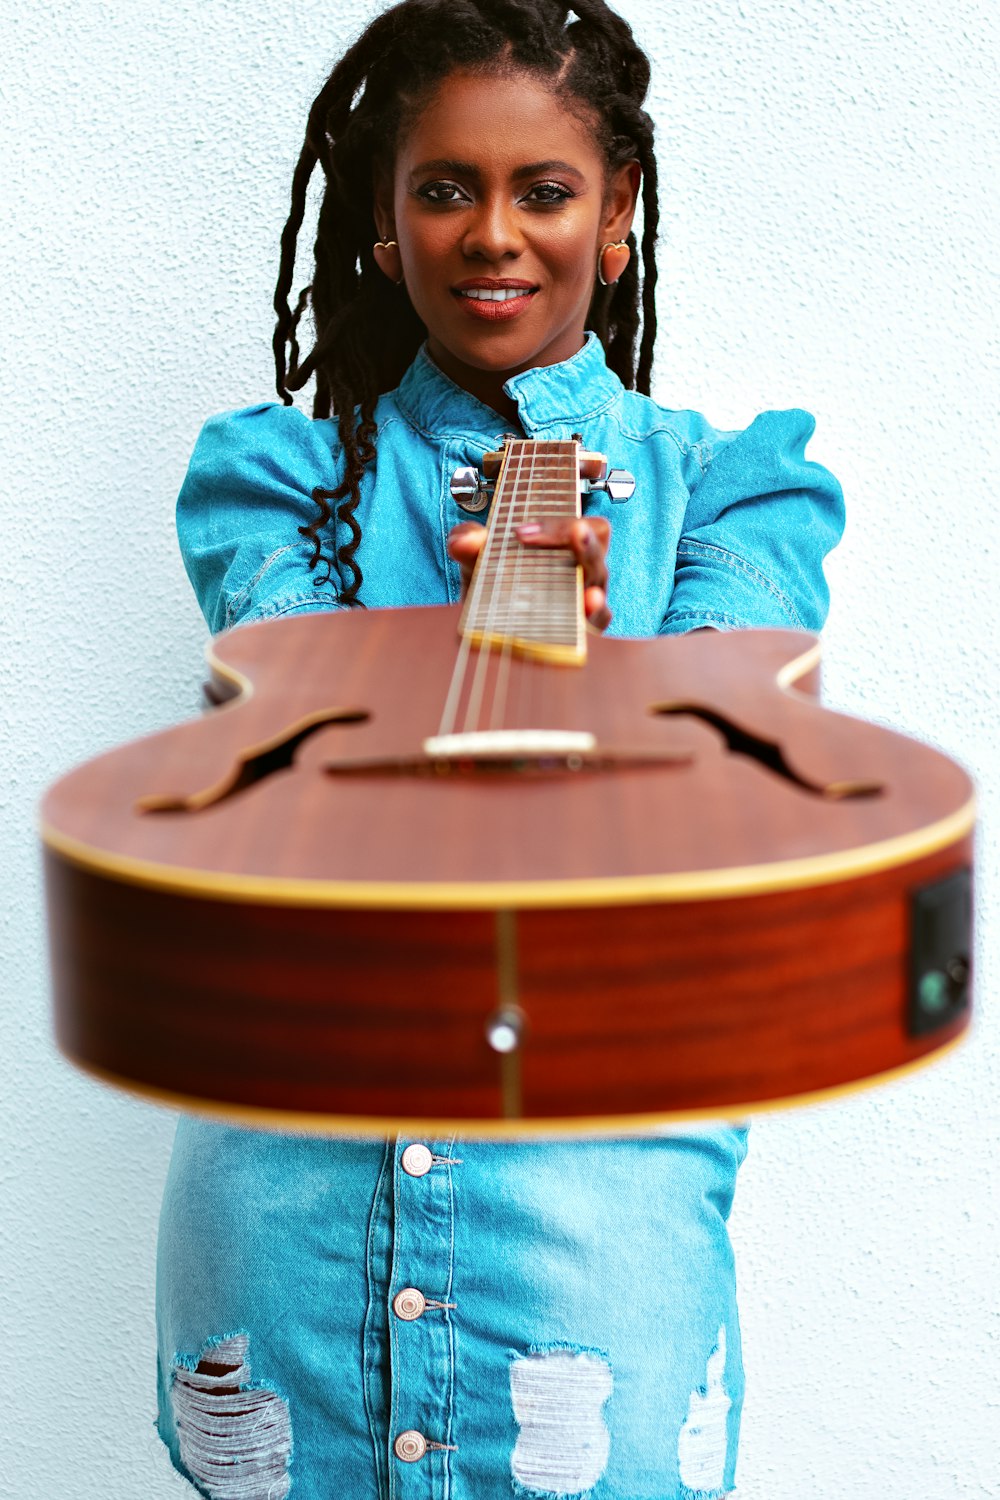 a young girl holding a guitar in her hands